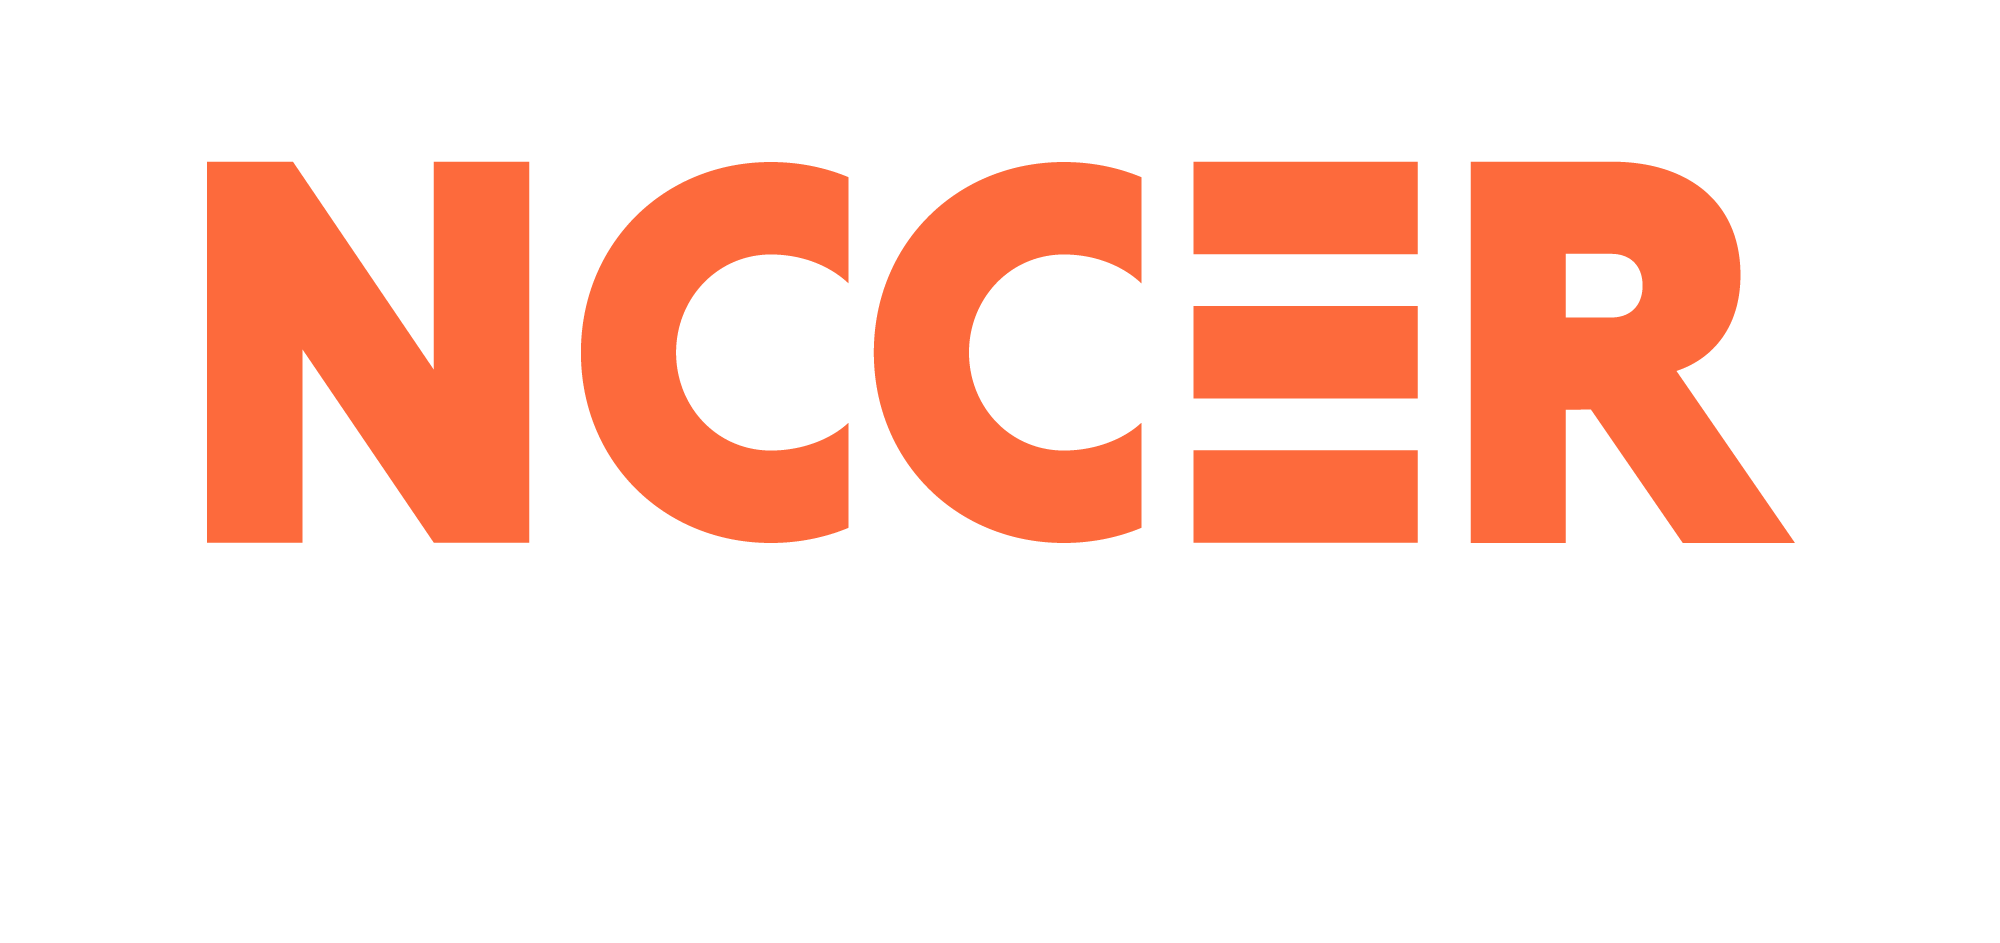 National Center for Construction Education and Research (NCCER) logo